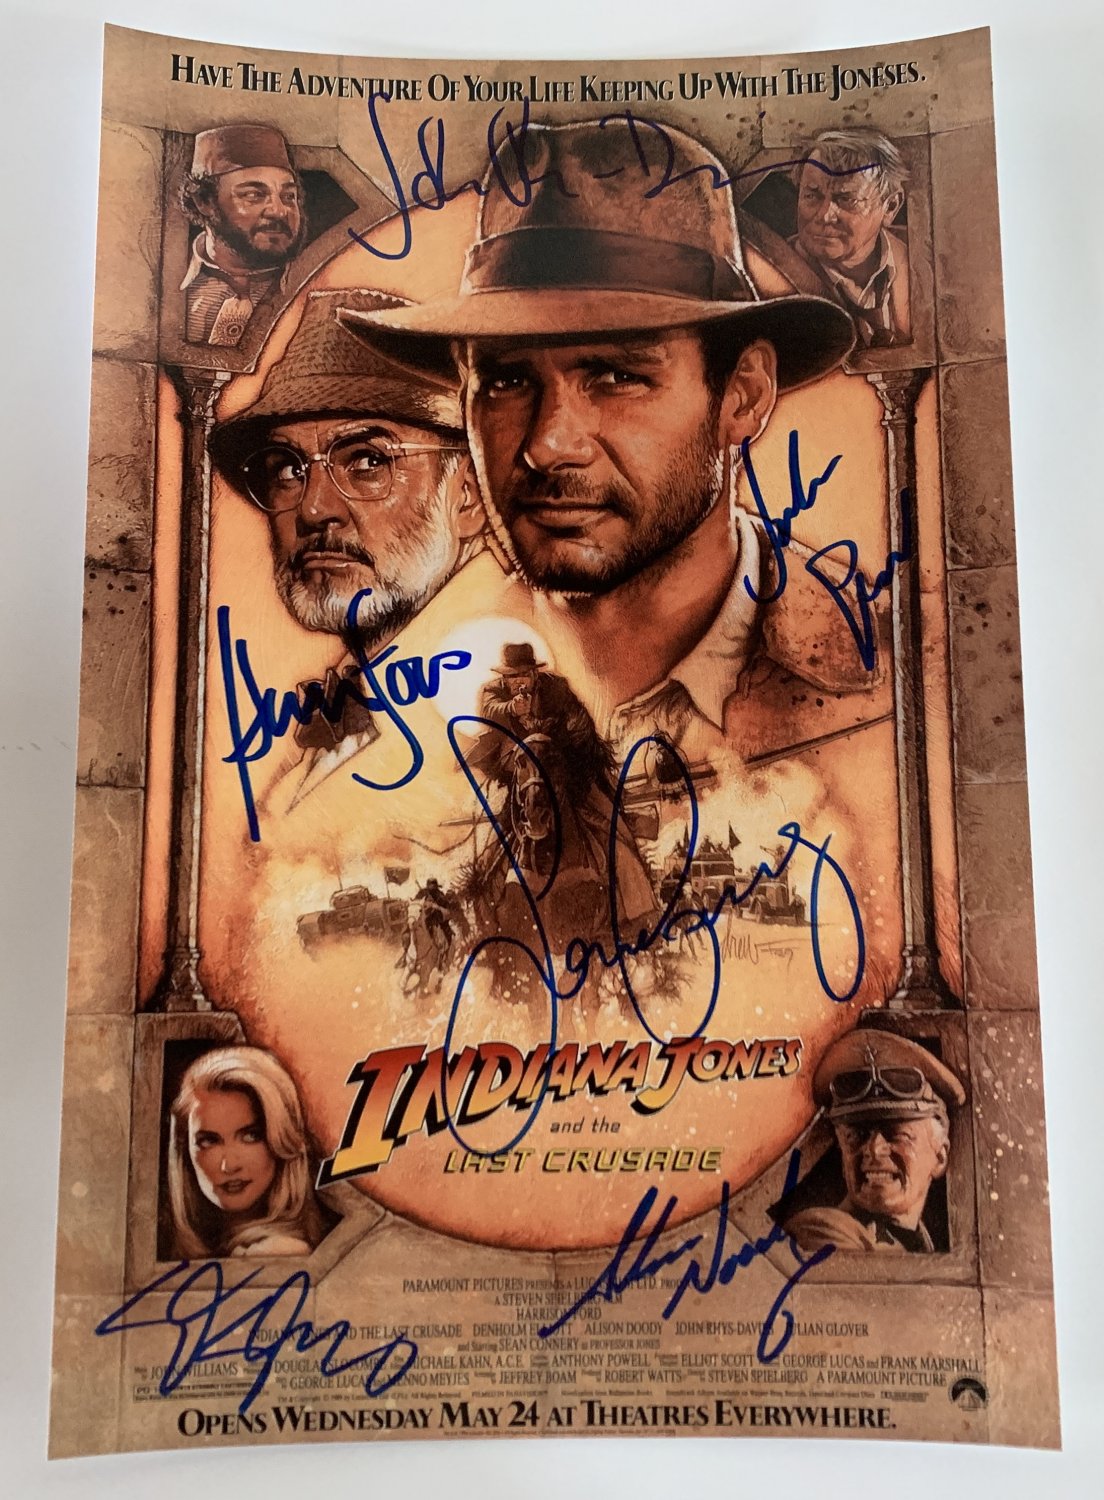 Indiana Jones cast signed autographed 8x12 photo photograph Harrison Ford Sean Connery